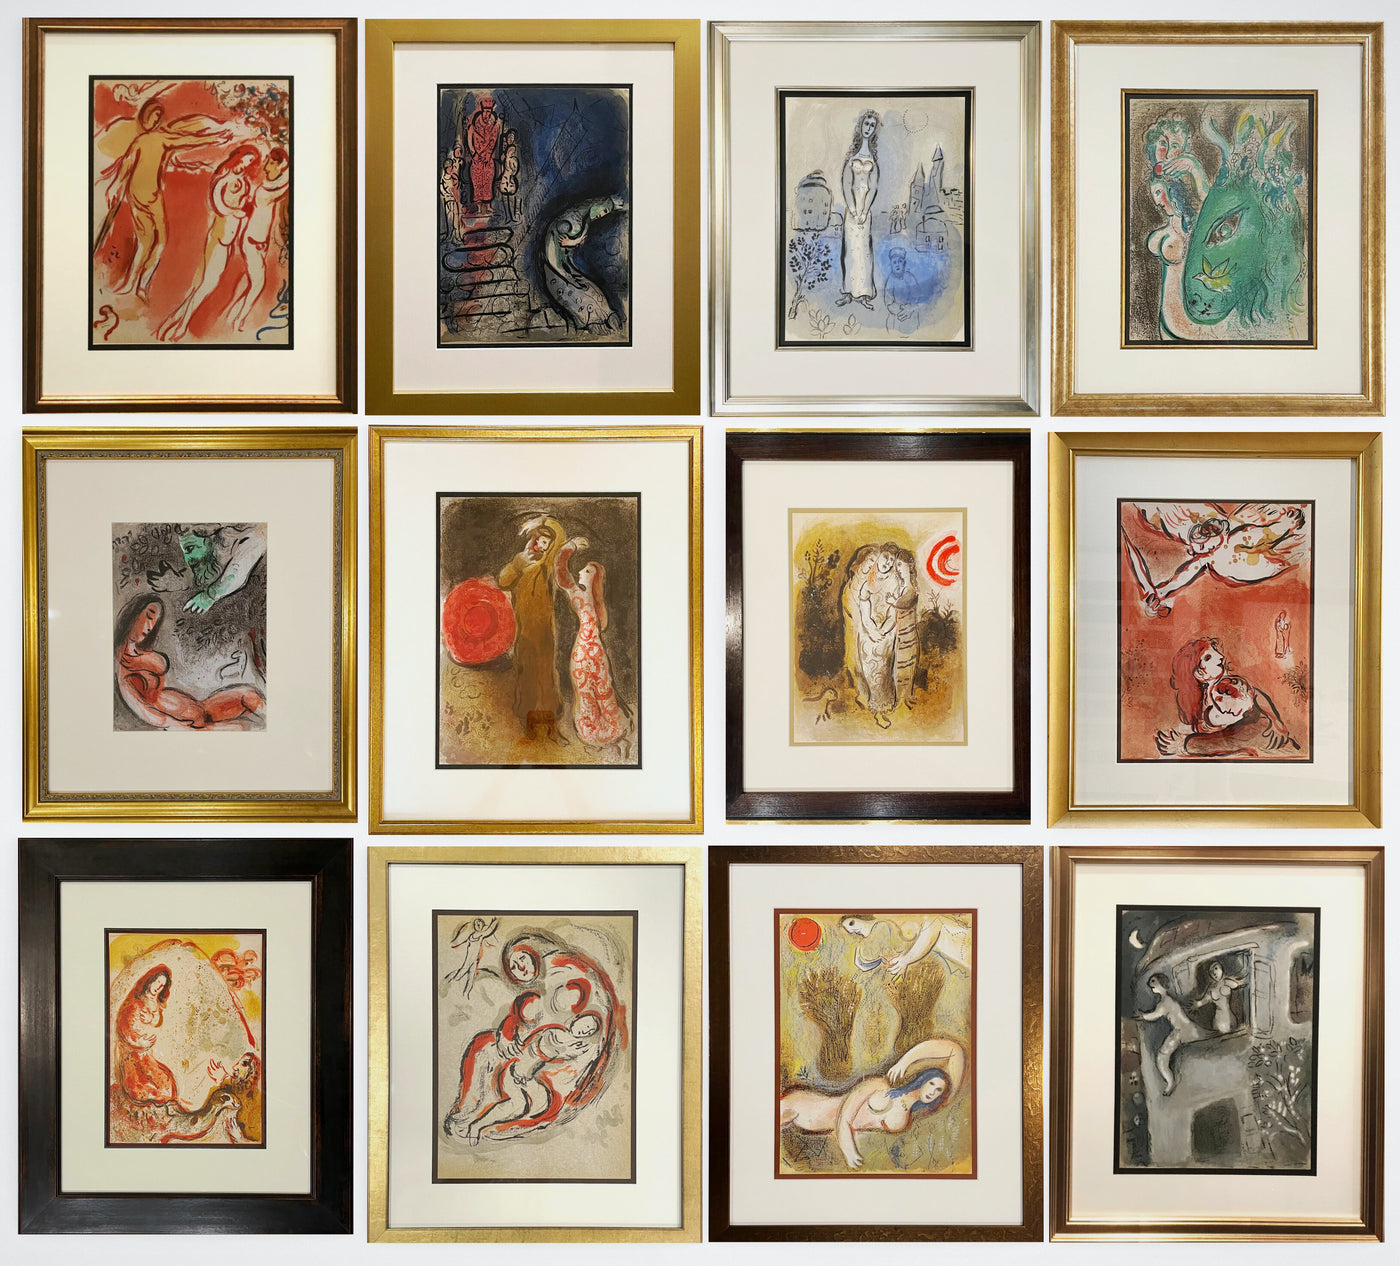 Marc Chagall Drawings for the Bible (1960)